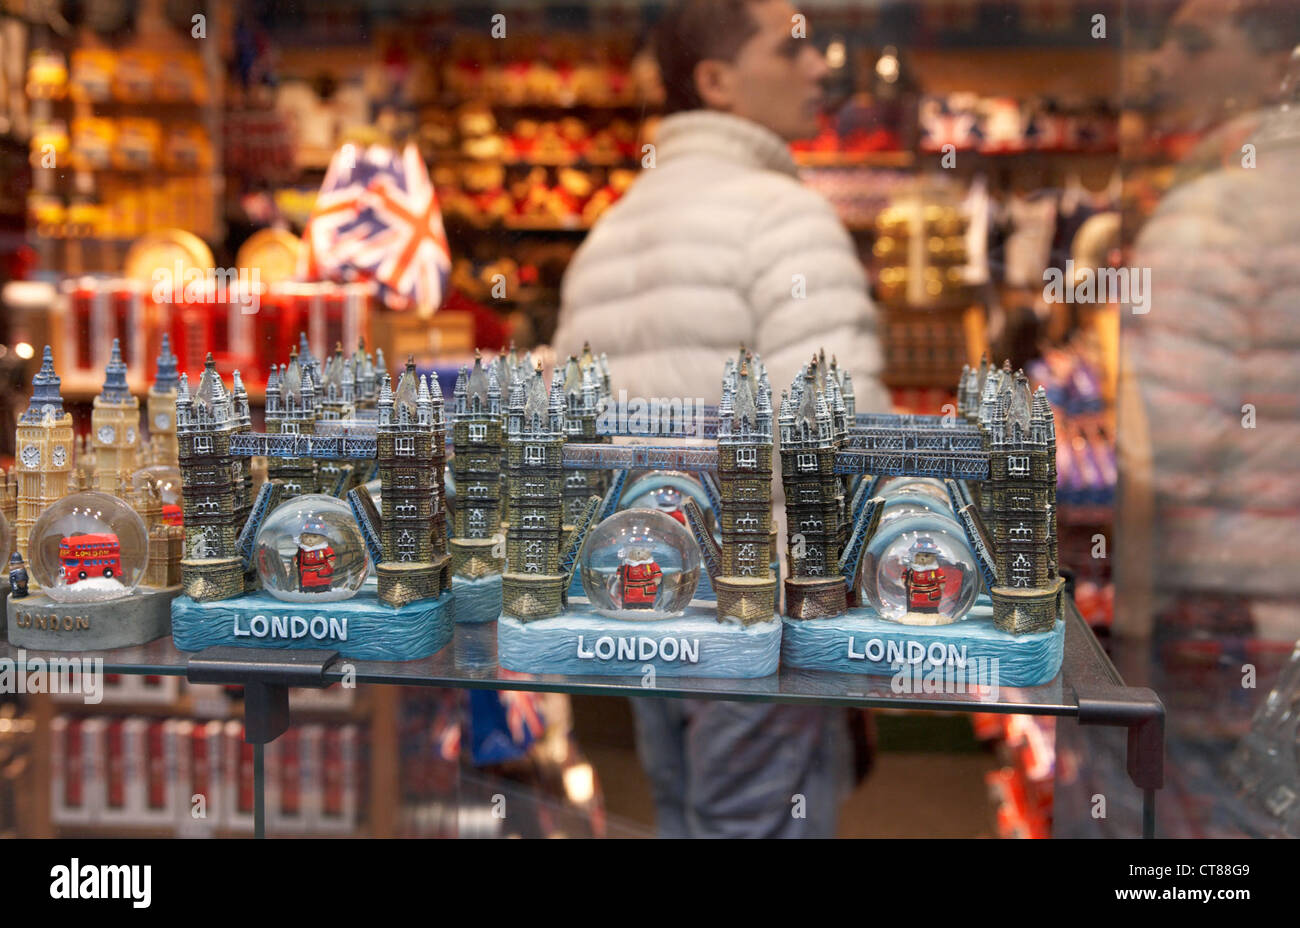 London - miniatures as souvenirs in a shop window Stock Photo